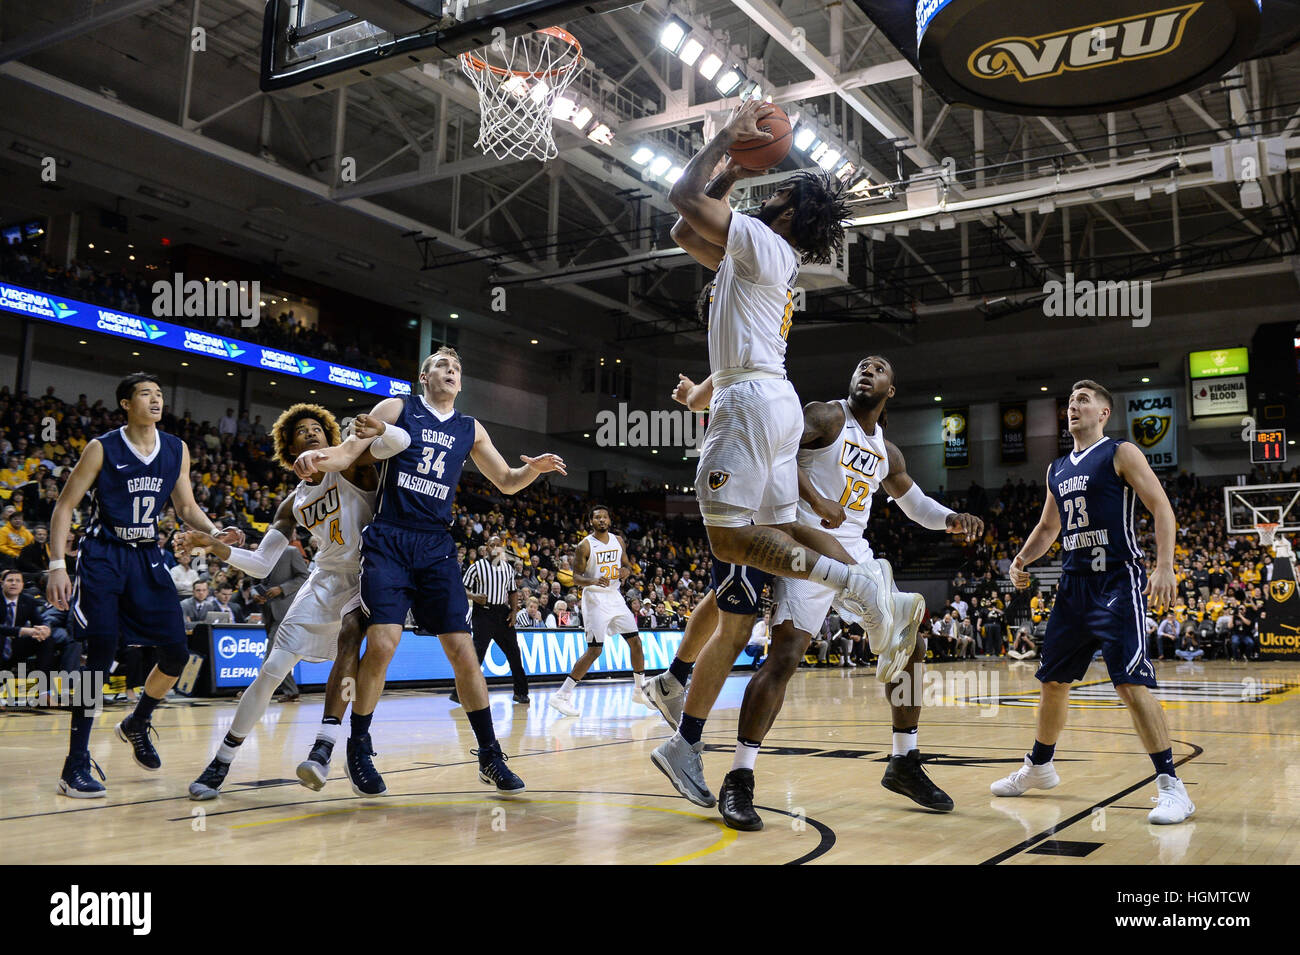 Virginia, USA. 11th Jan, 2017. JONATHAN WILLIAMS (10) shoots a layup during the game held at E.J. Wade Arena at the Stuart C. Siegel Center, Richmond, Virginia. Credit: Amy Sanderson/ZUMA Wire/Alamy Live News Stock Photo